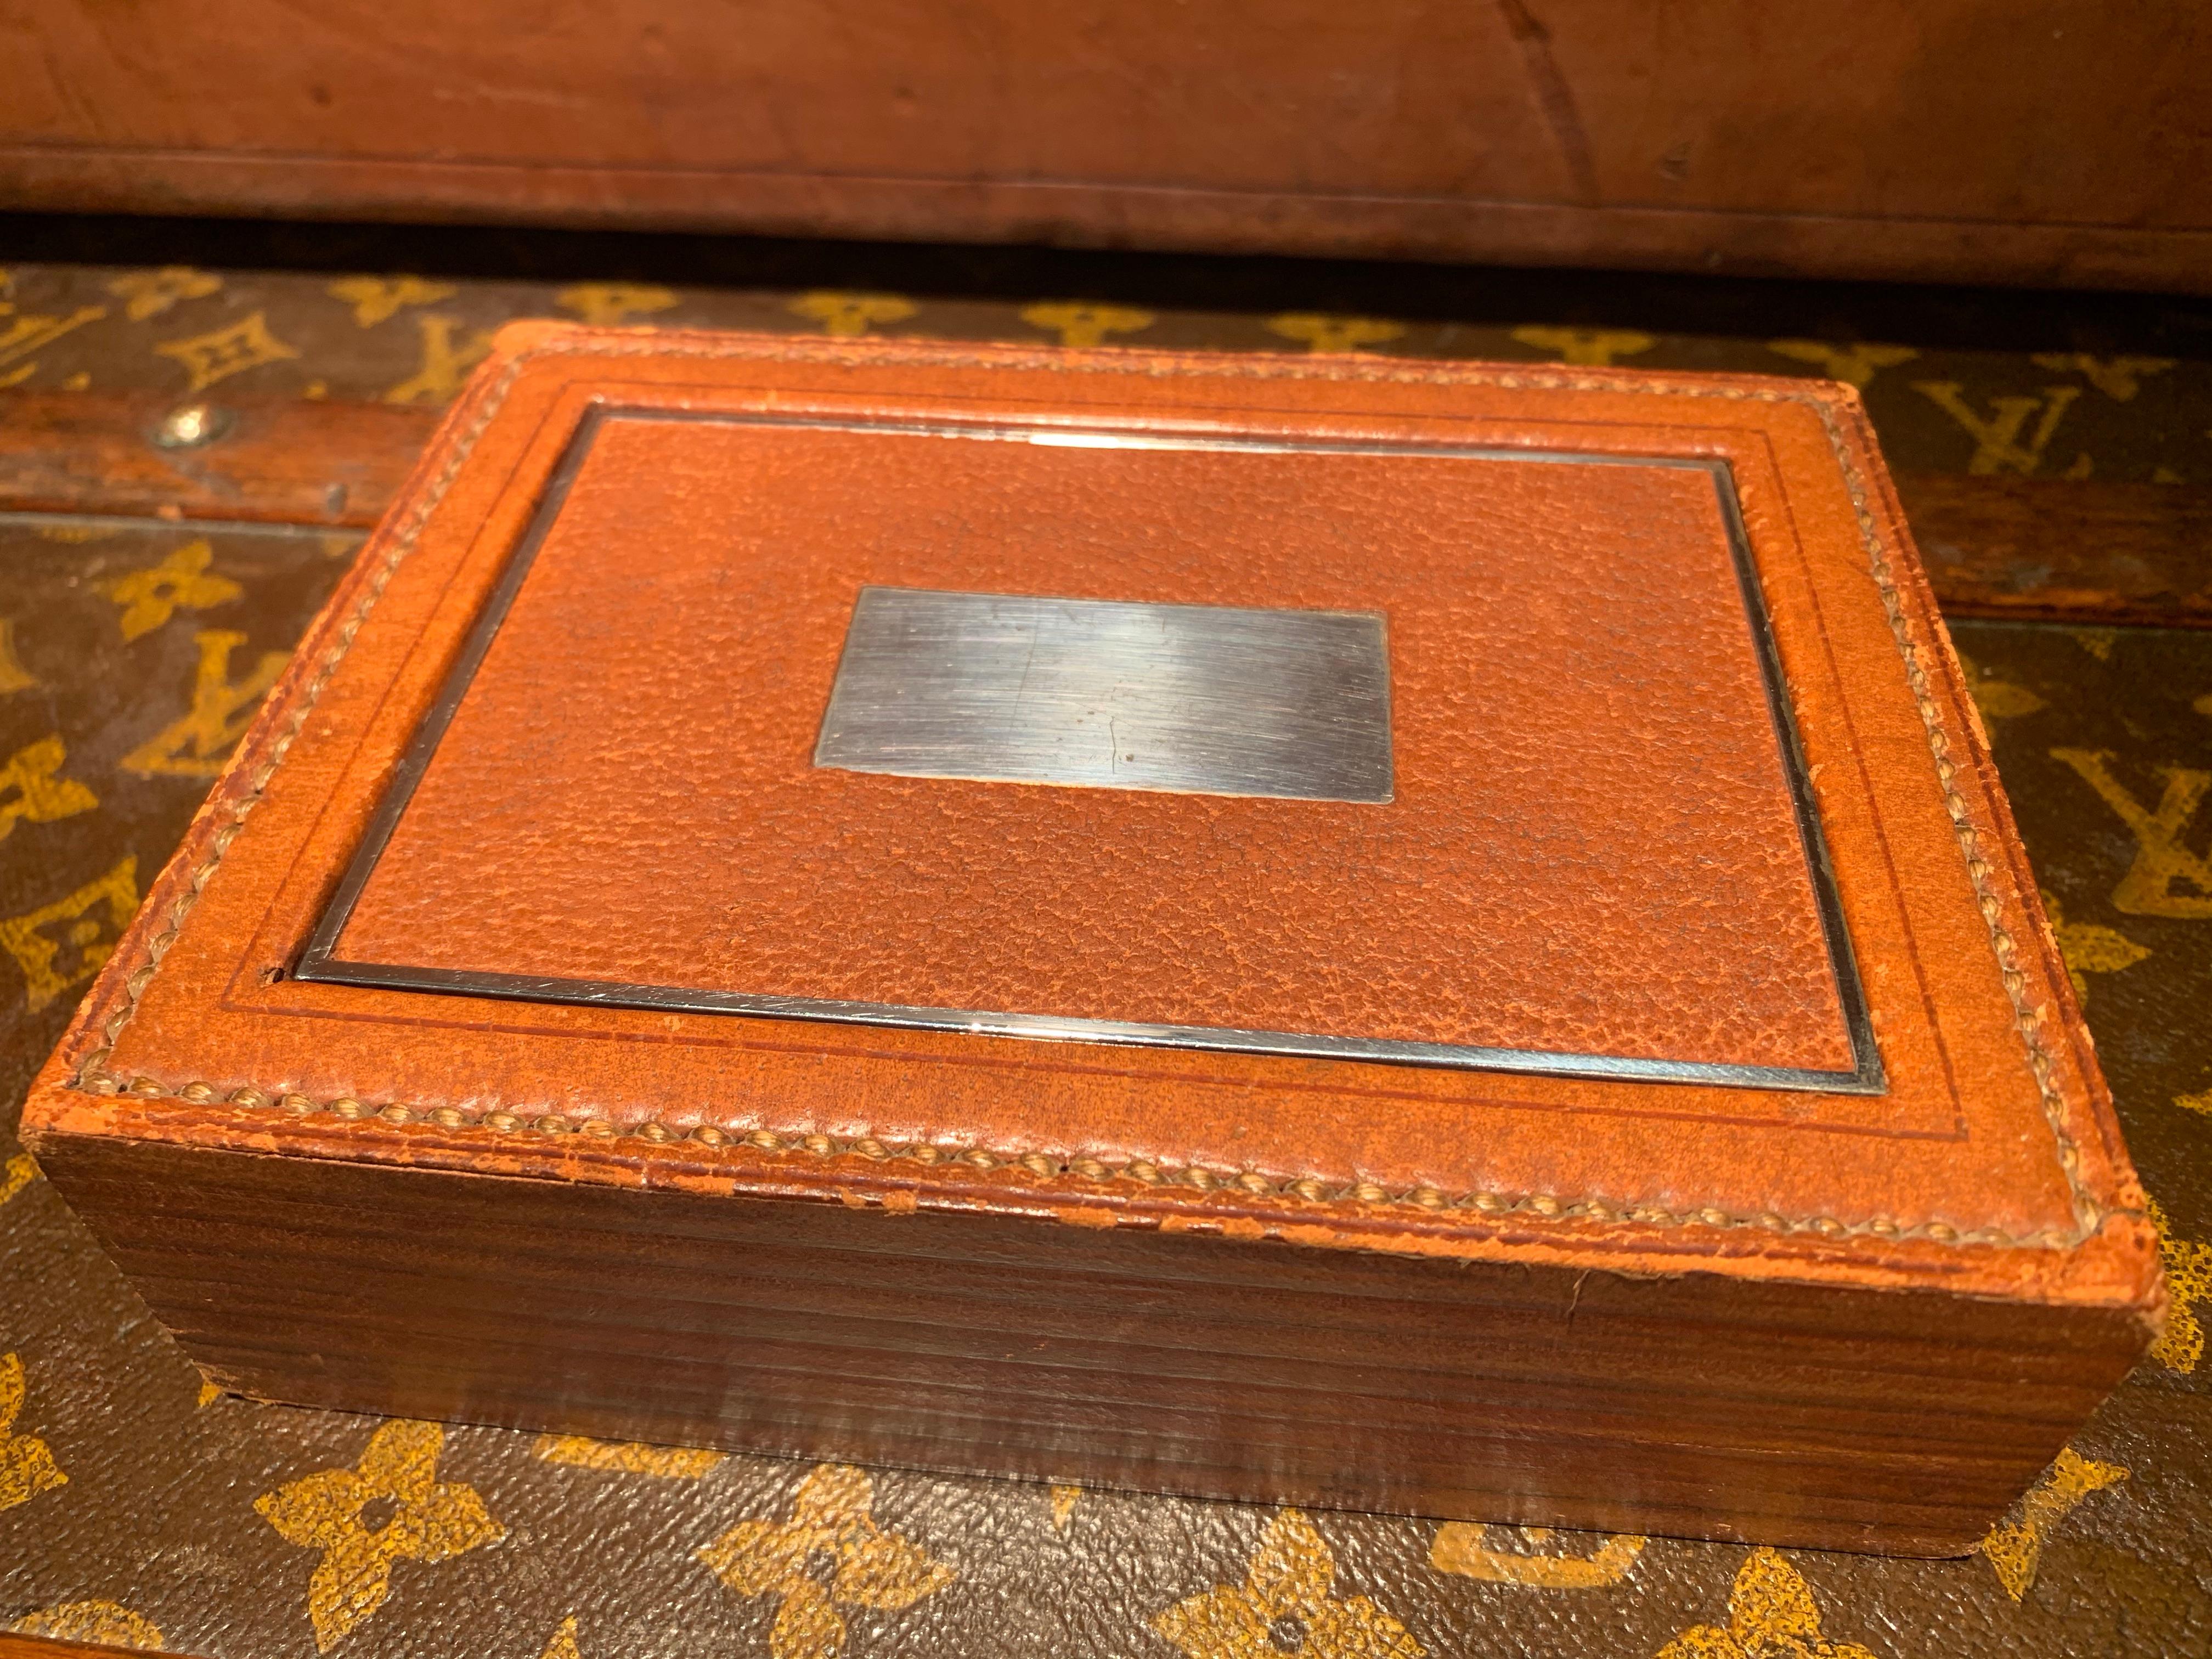 Rare 1940s Hermès Flip top Box, designed by Paul Dupré-Lafon (1900-1971), used to store cigarettes.

Light brown leather with saddle stitching on the exterior and mahogany wood on the inside. The lid is in chrome metal (signed Hermès on the